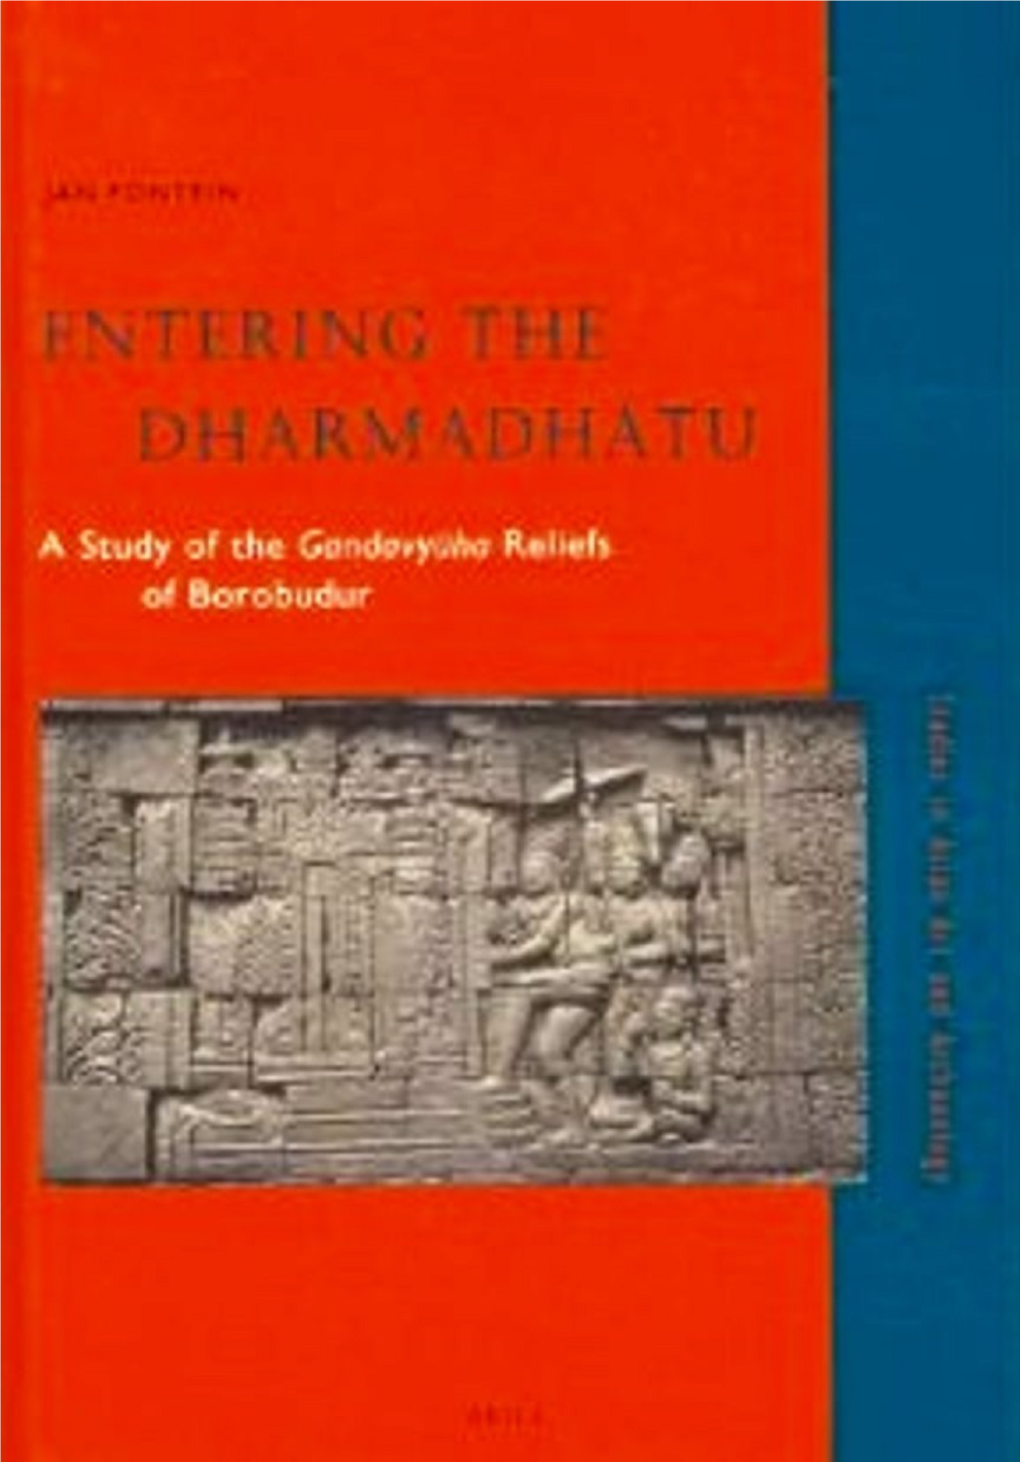 Entering the Dharmadhatu : a Study of the Gandavyuha Reliefs of Borobudur / by Jan Fontein